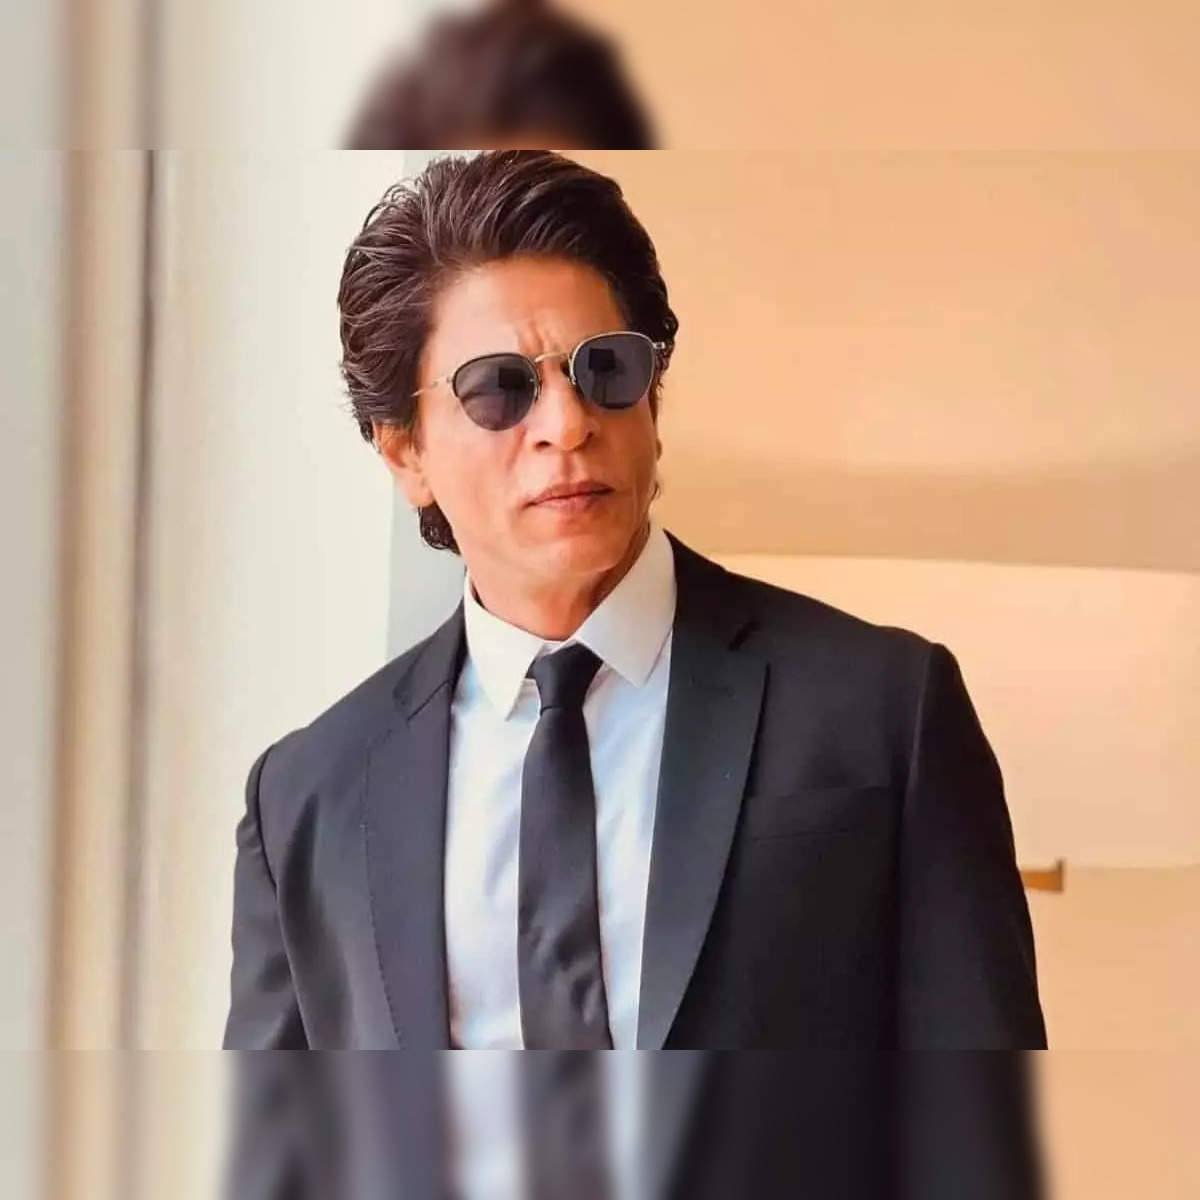 Shah Rukh Khan Greets His Fans Outside Mannat Days After Dunki Release  (WATCH)